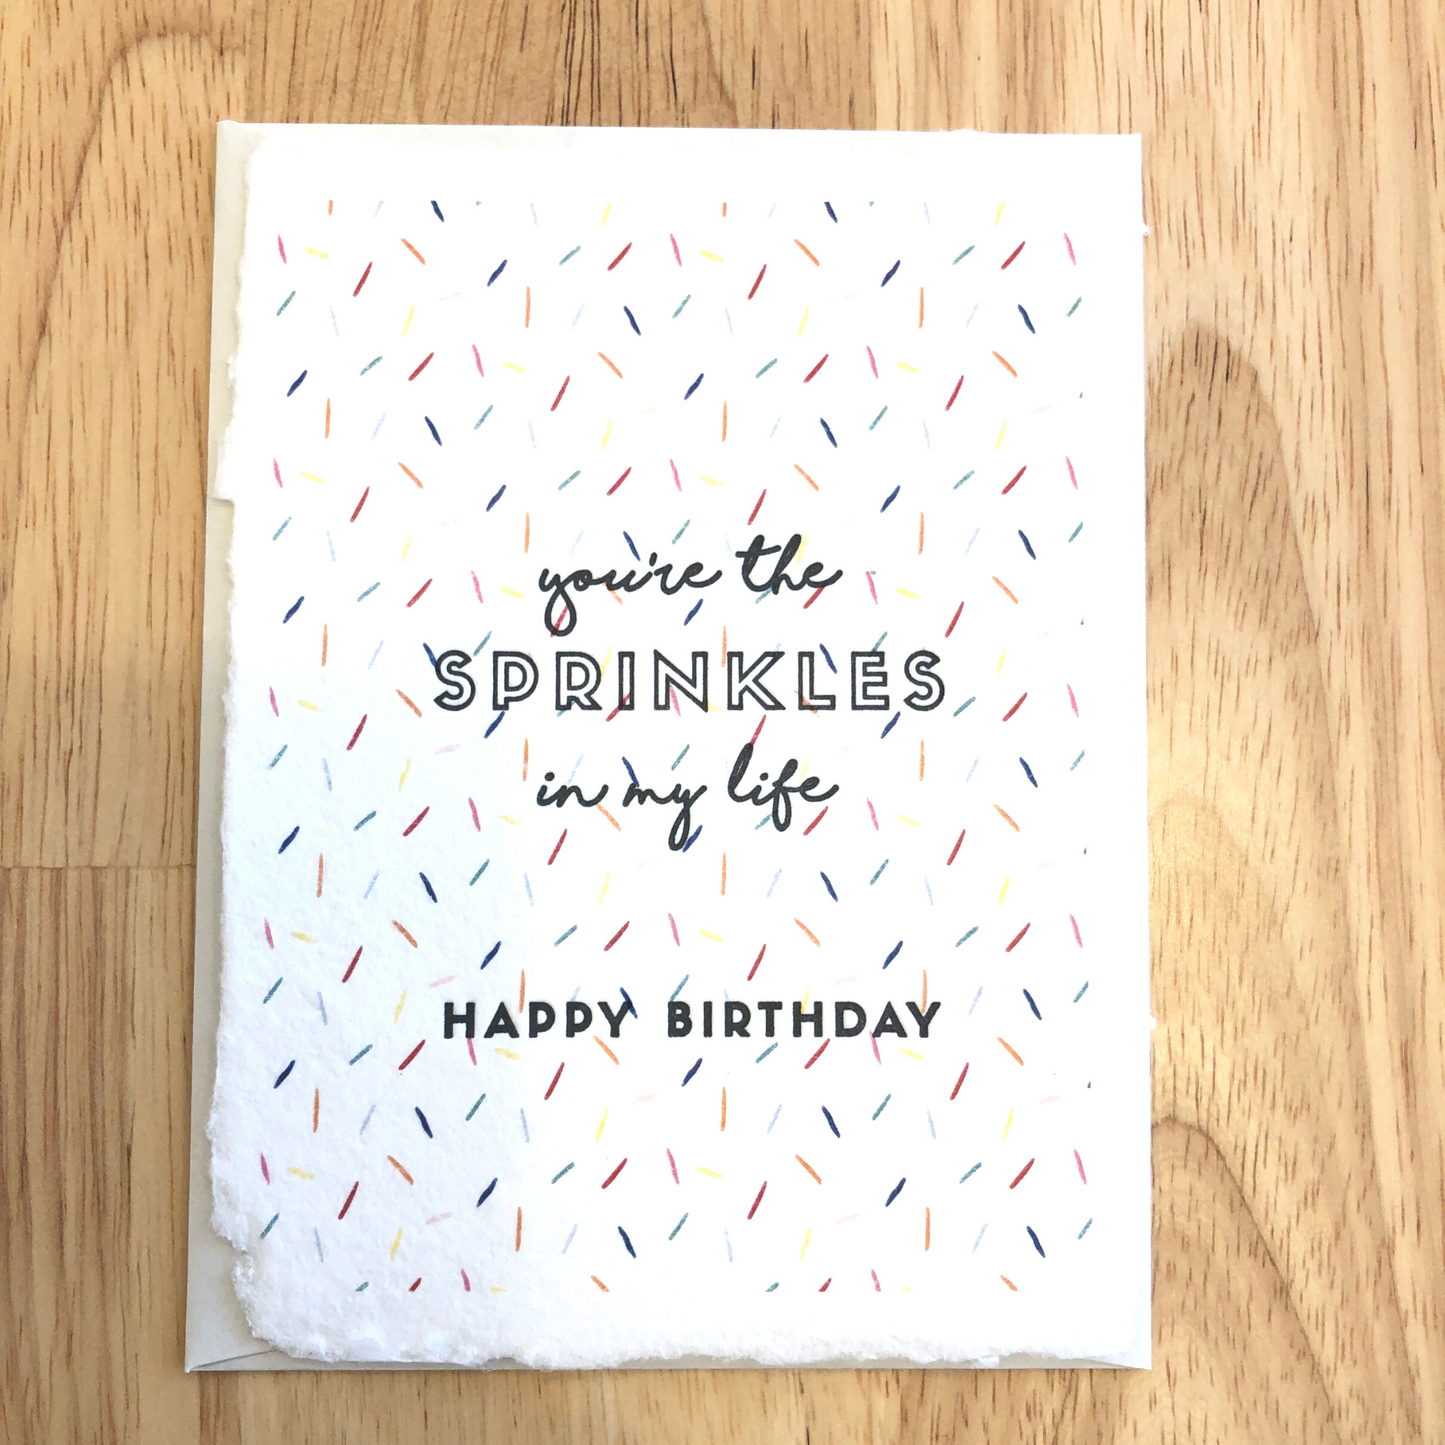 Handmade Birthday Card- "You're the Sprinkles in my life"